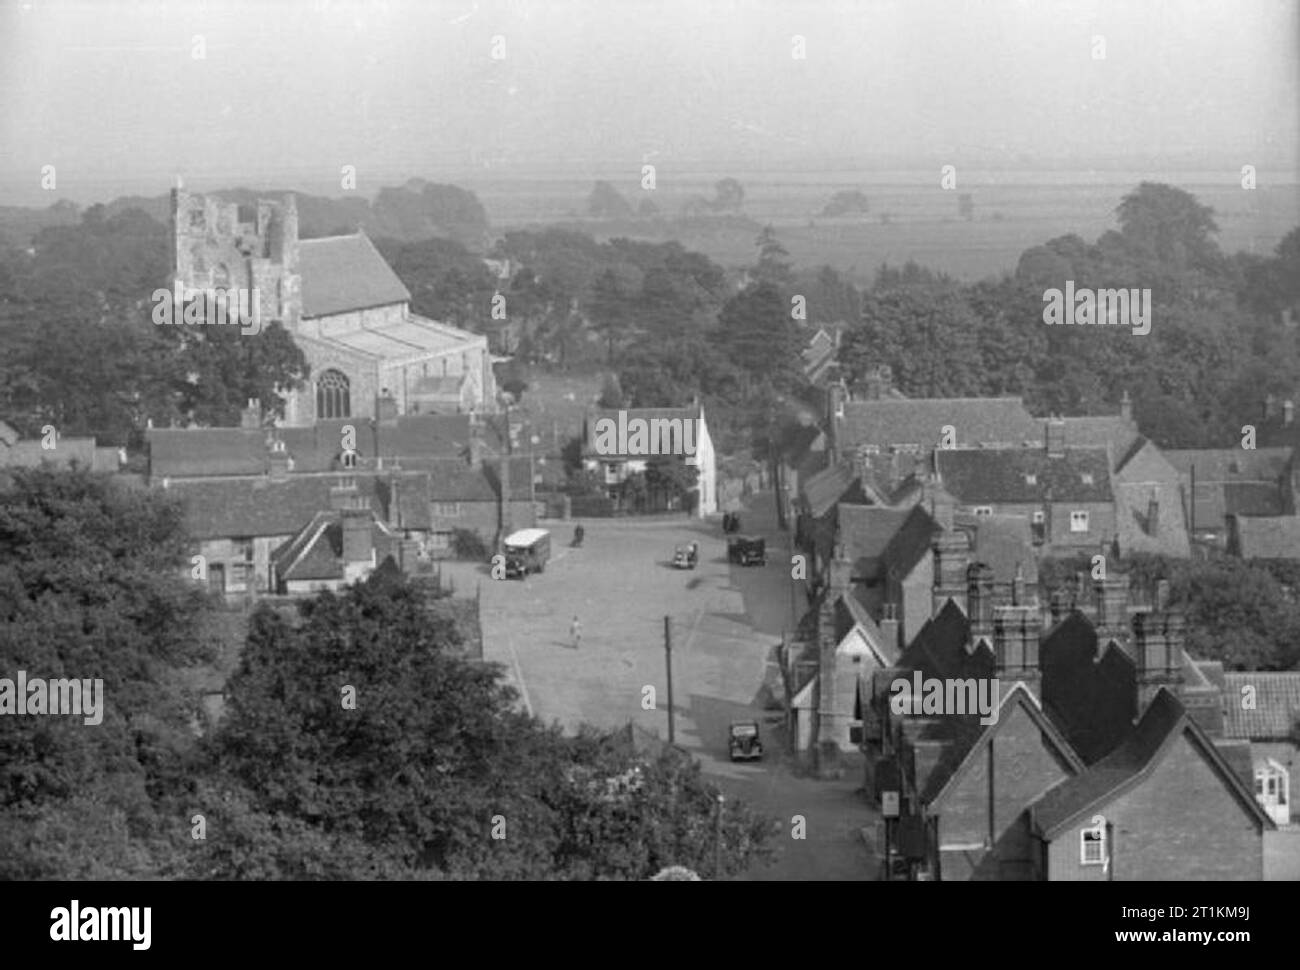 Invasion Village- Everyday Life in Orford, Suffolk, England, 1941 A wide view of the village of Orford, taken from the top of the castle tower, showing houses and vehicles. Dominating the skyline is the tower of St. Bartholomew's Church, visible on the left of the photograph, just in front of the fields and trees in the background. Stock Photo